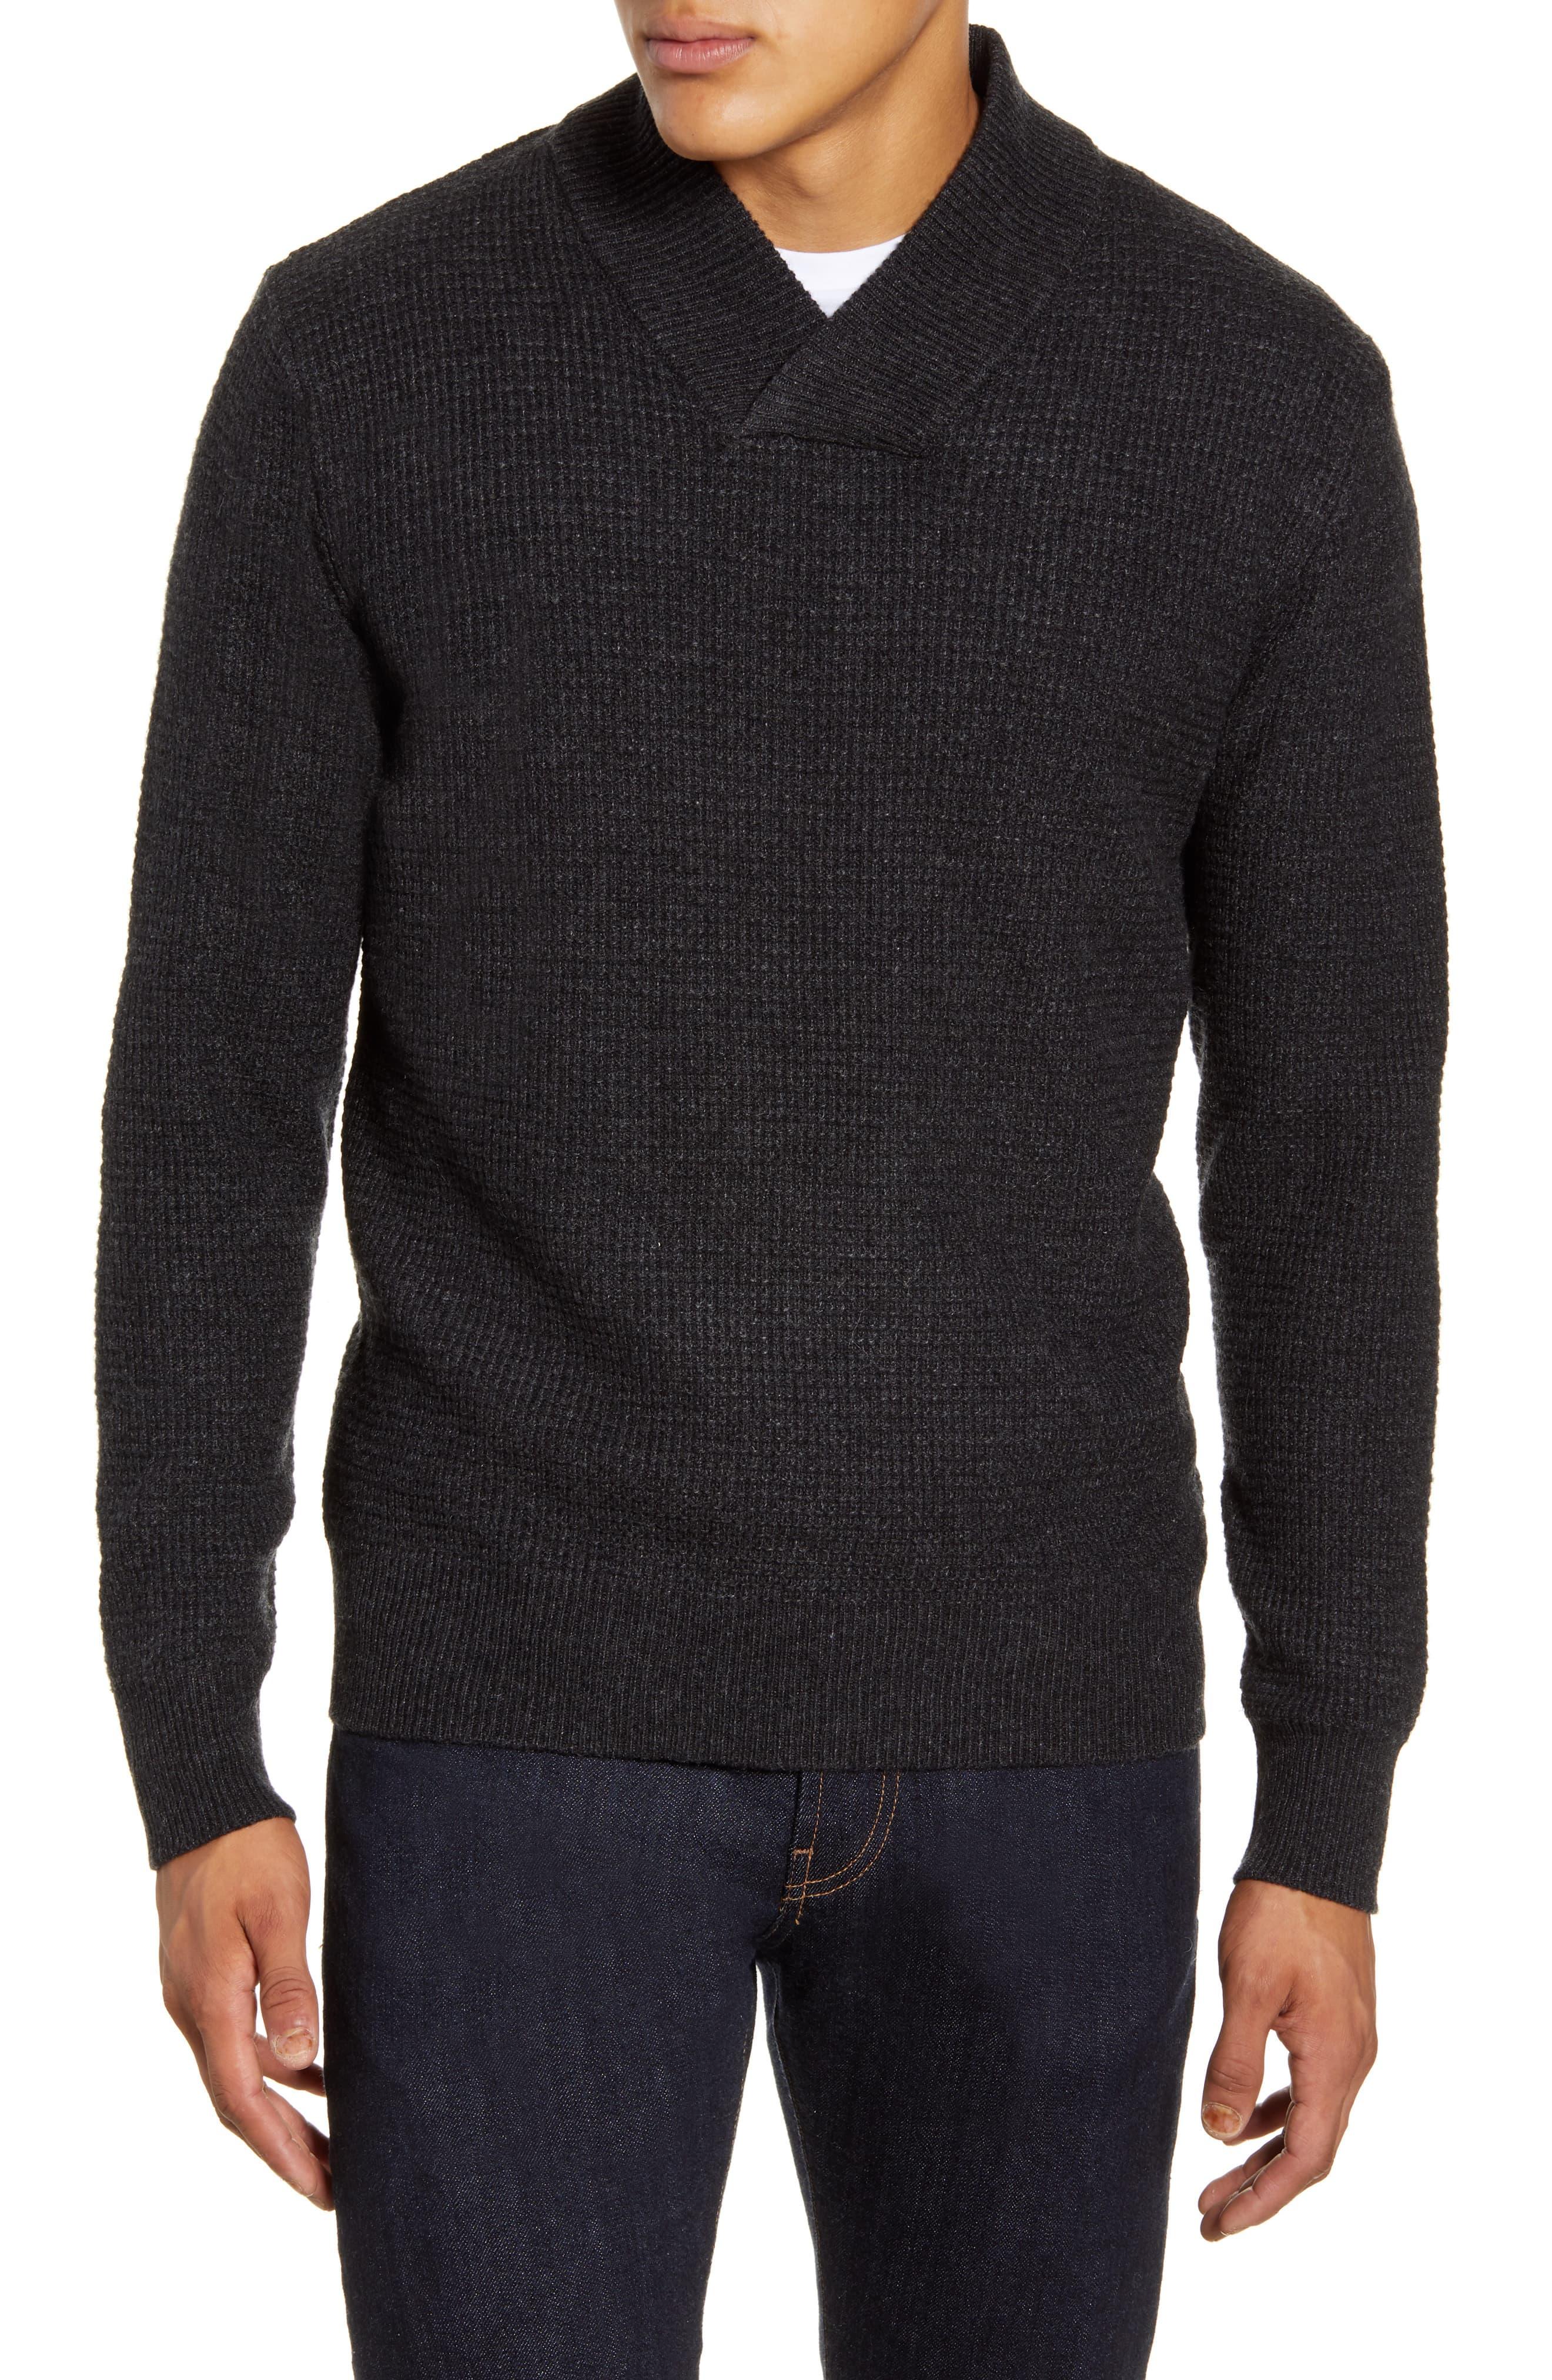 Schott Nyc Waffle Knit Thermal Wool Blend Pullover in Black for Men - Lyst